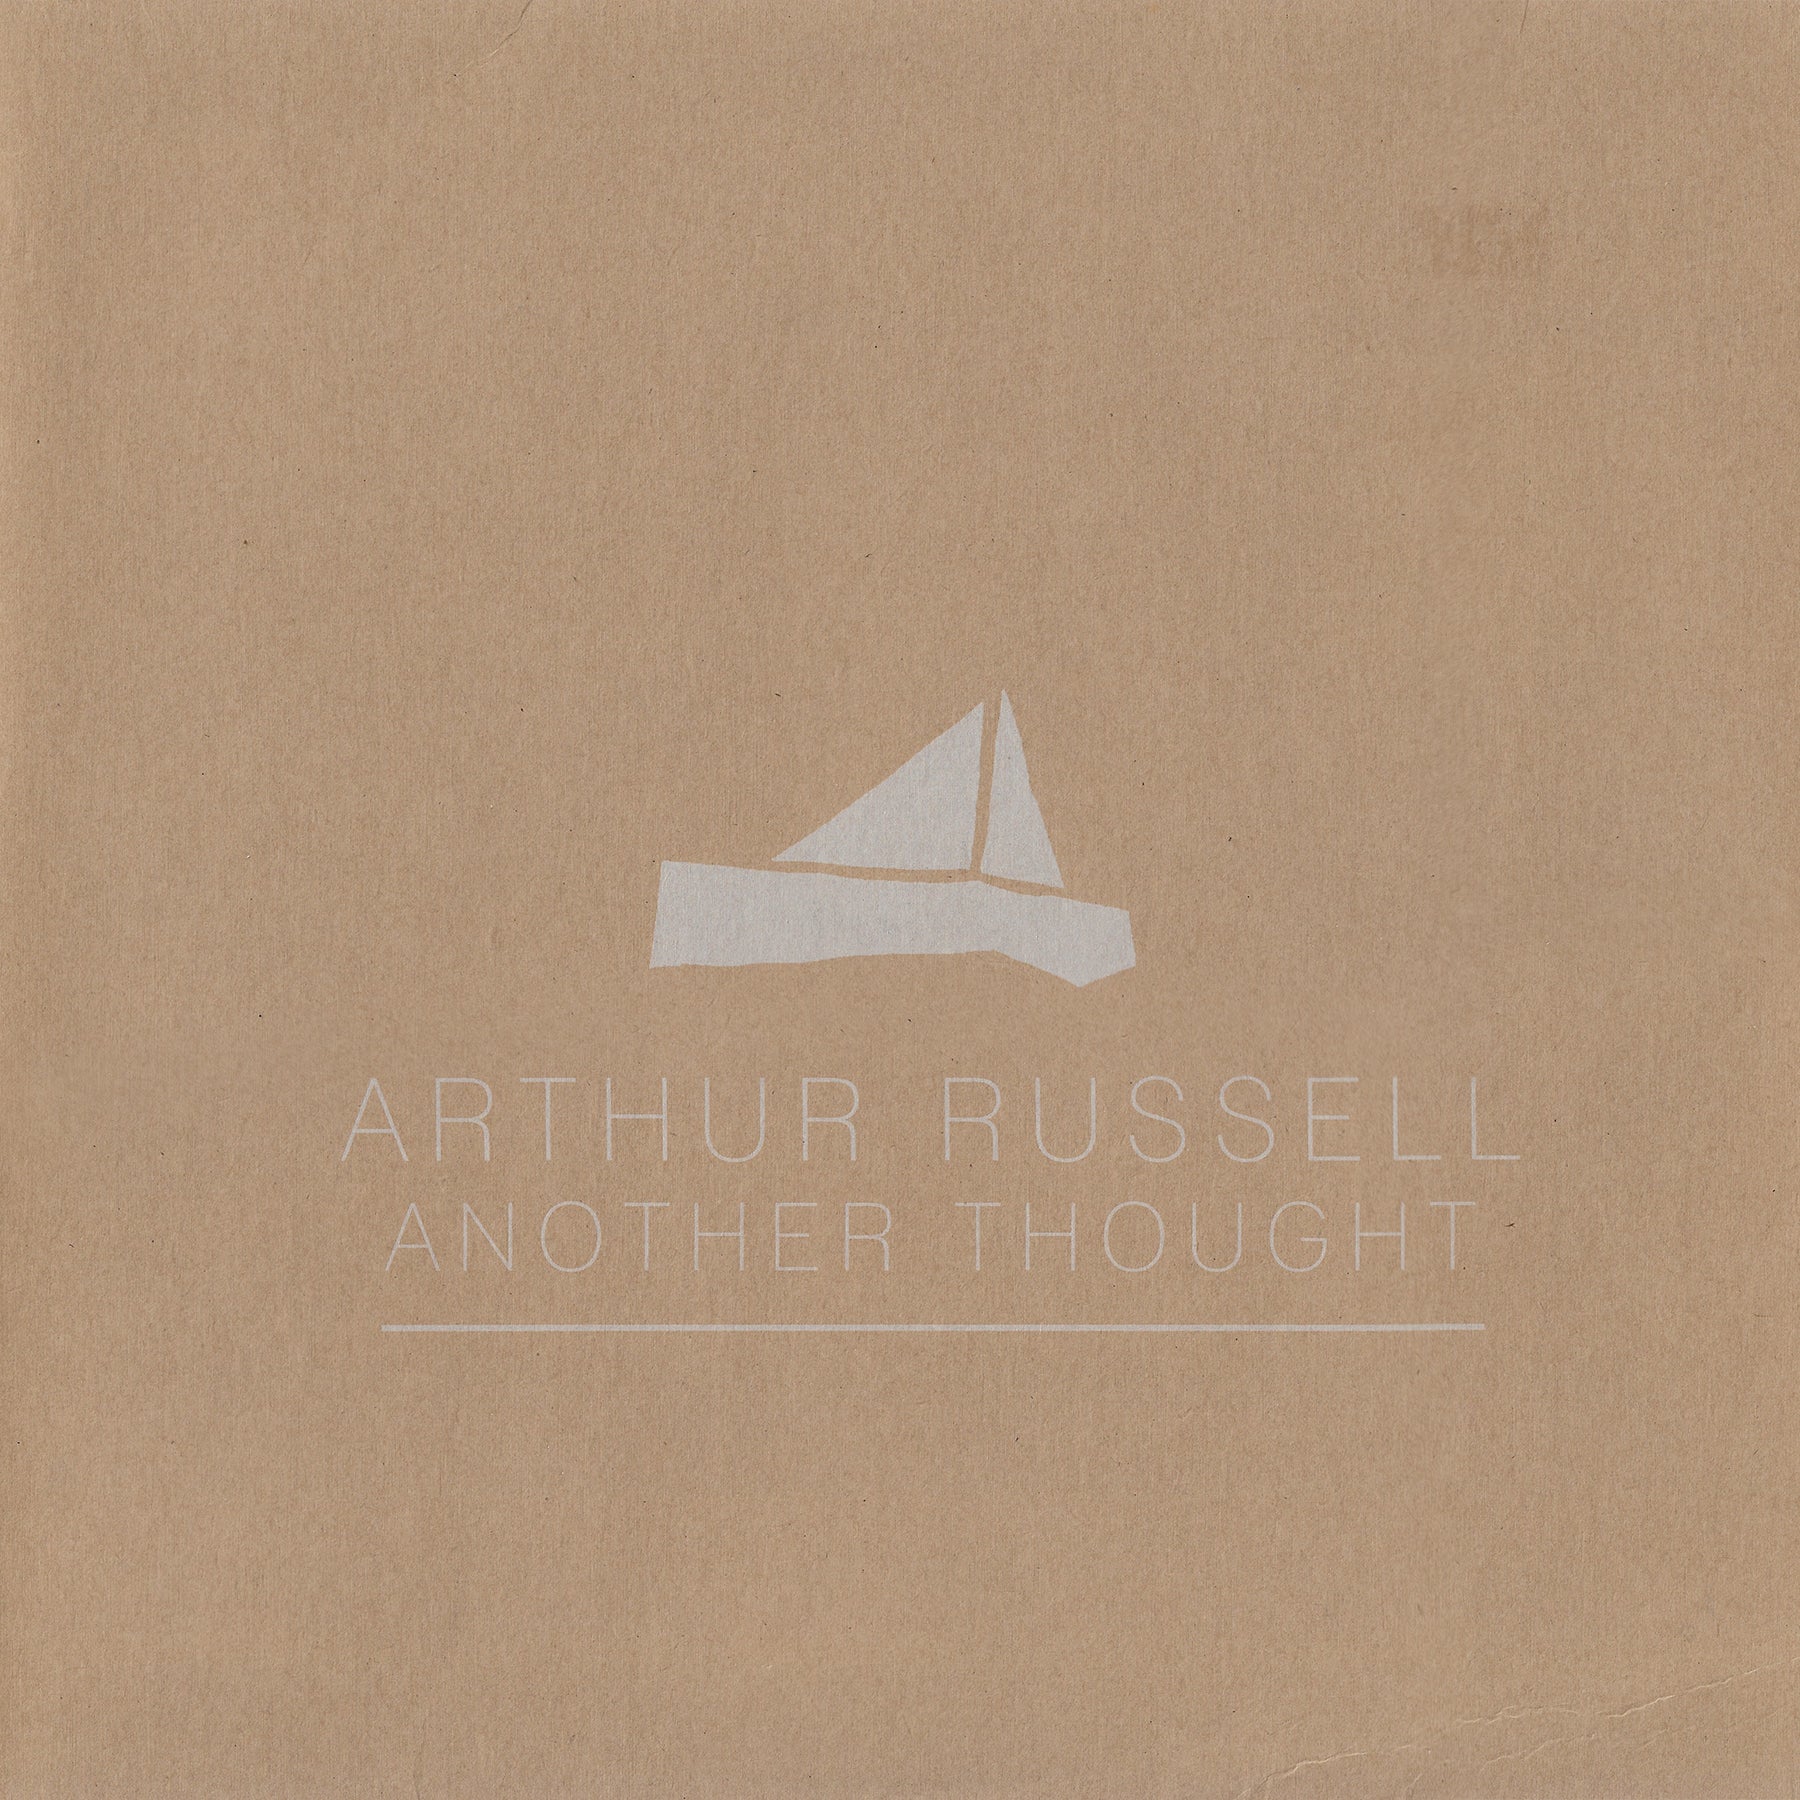 Arthur Russell - Another Thought